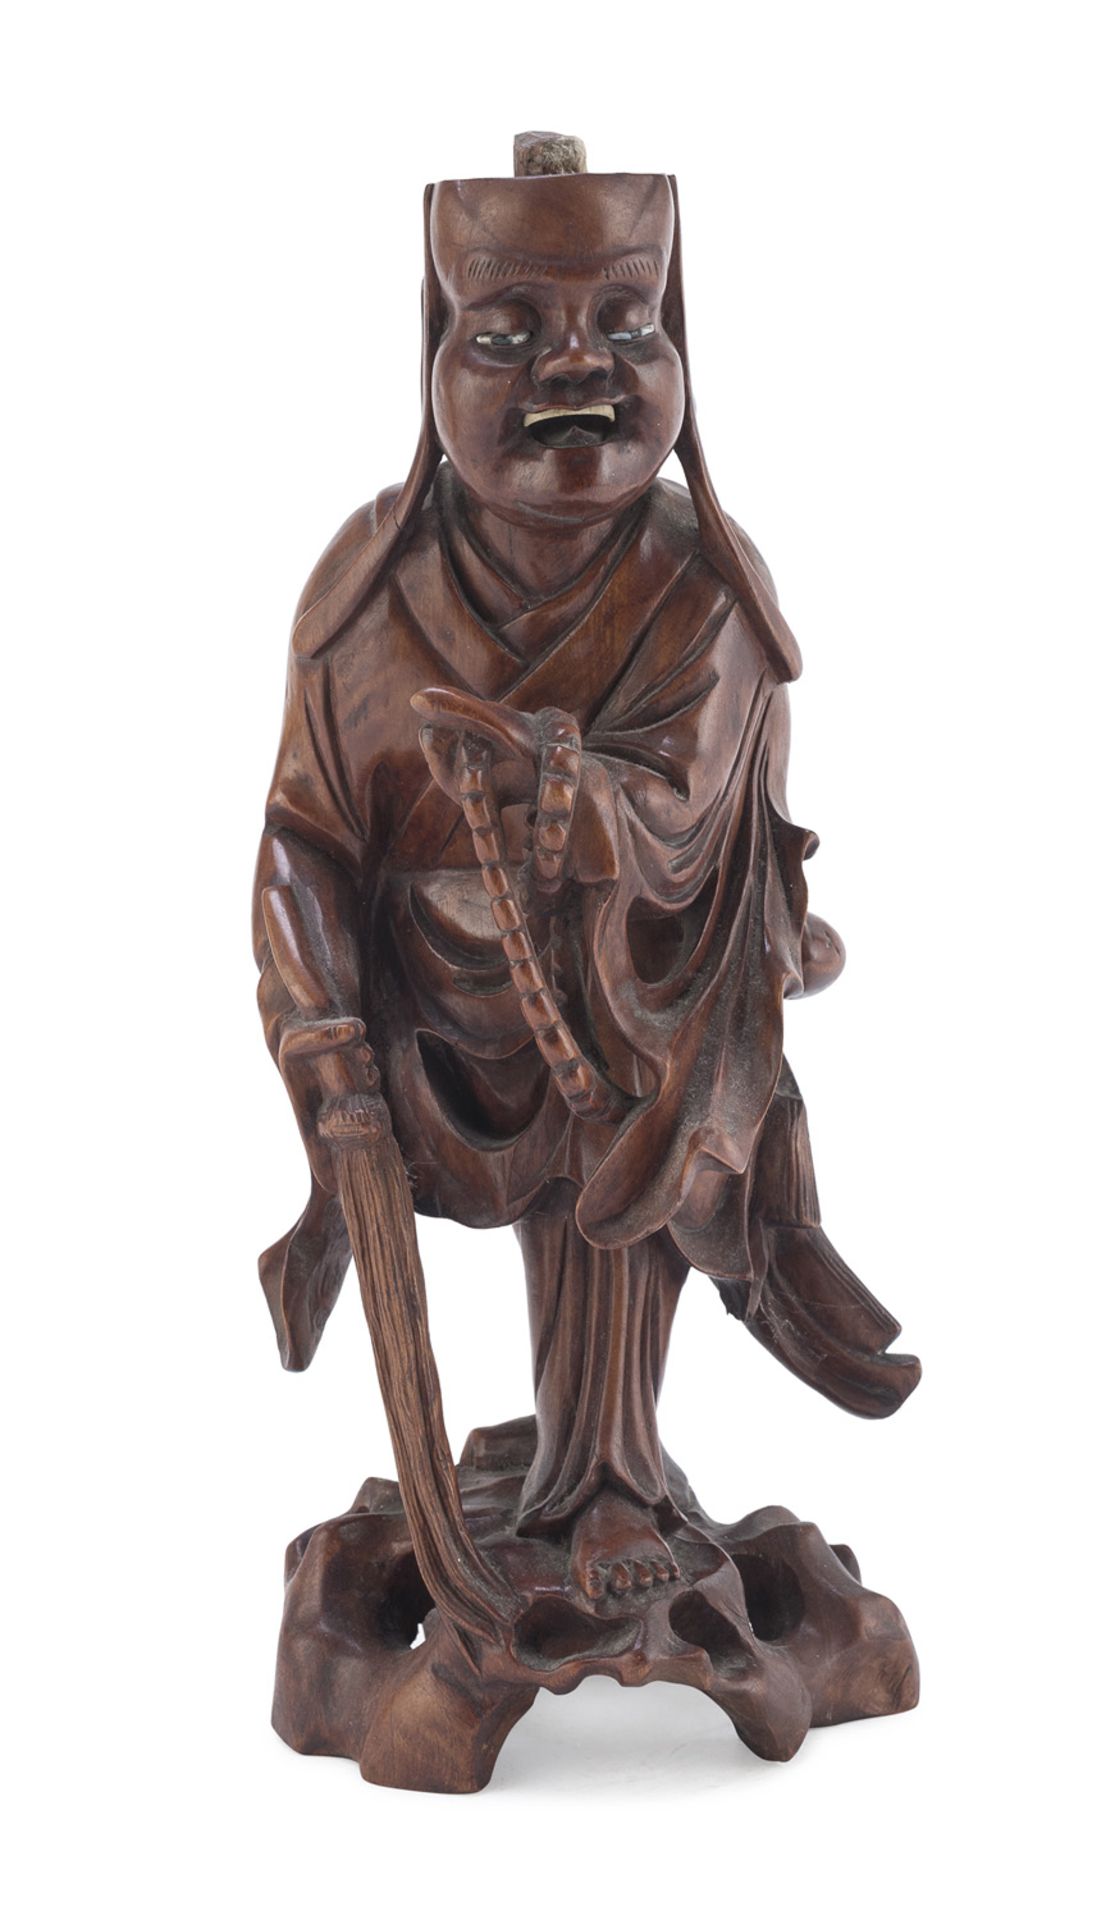 A CHINESE WOODEN LOHAN SCULPTURE 20TH CENTURY.